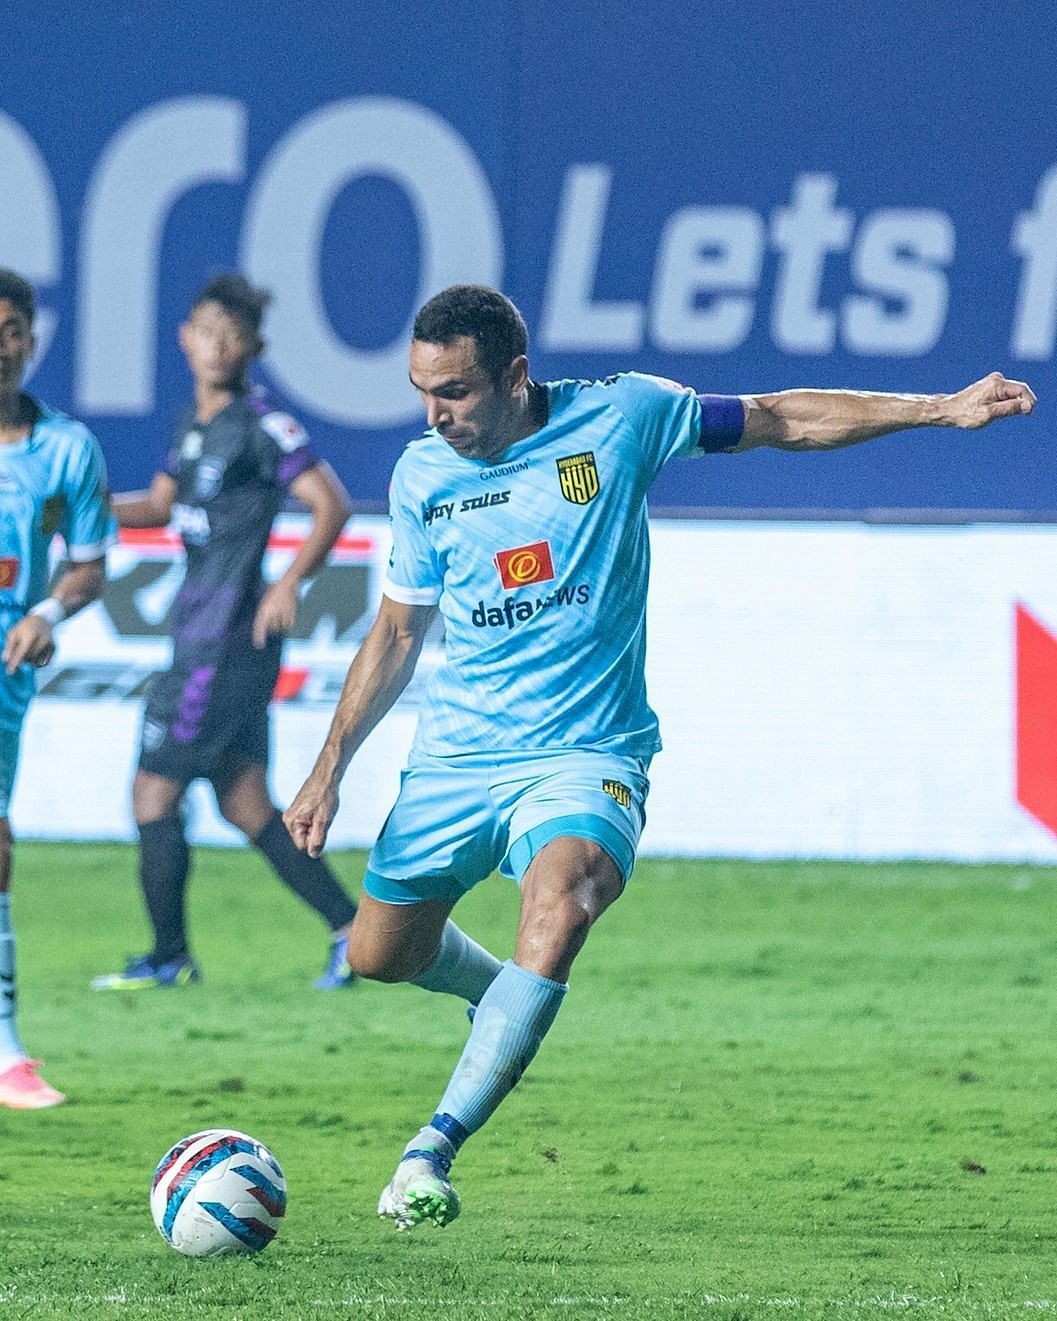 Captain Joao Victor scored a brilliant goal to secure the victory (Image courtesy: ISL social media)